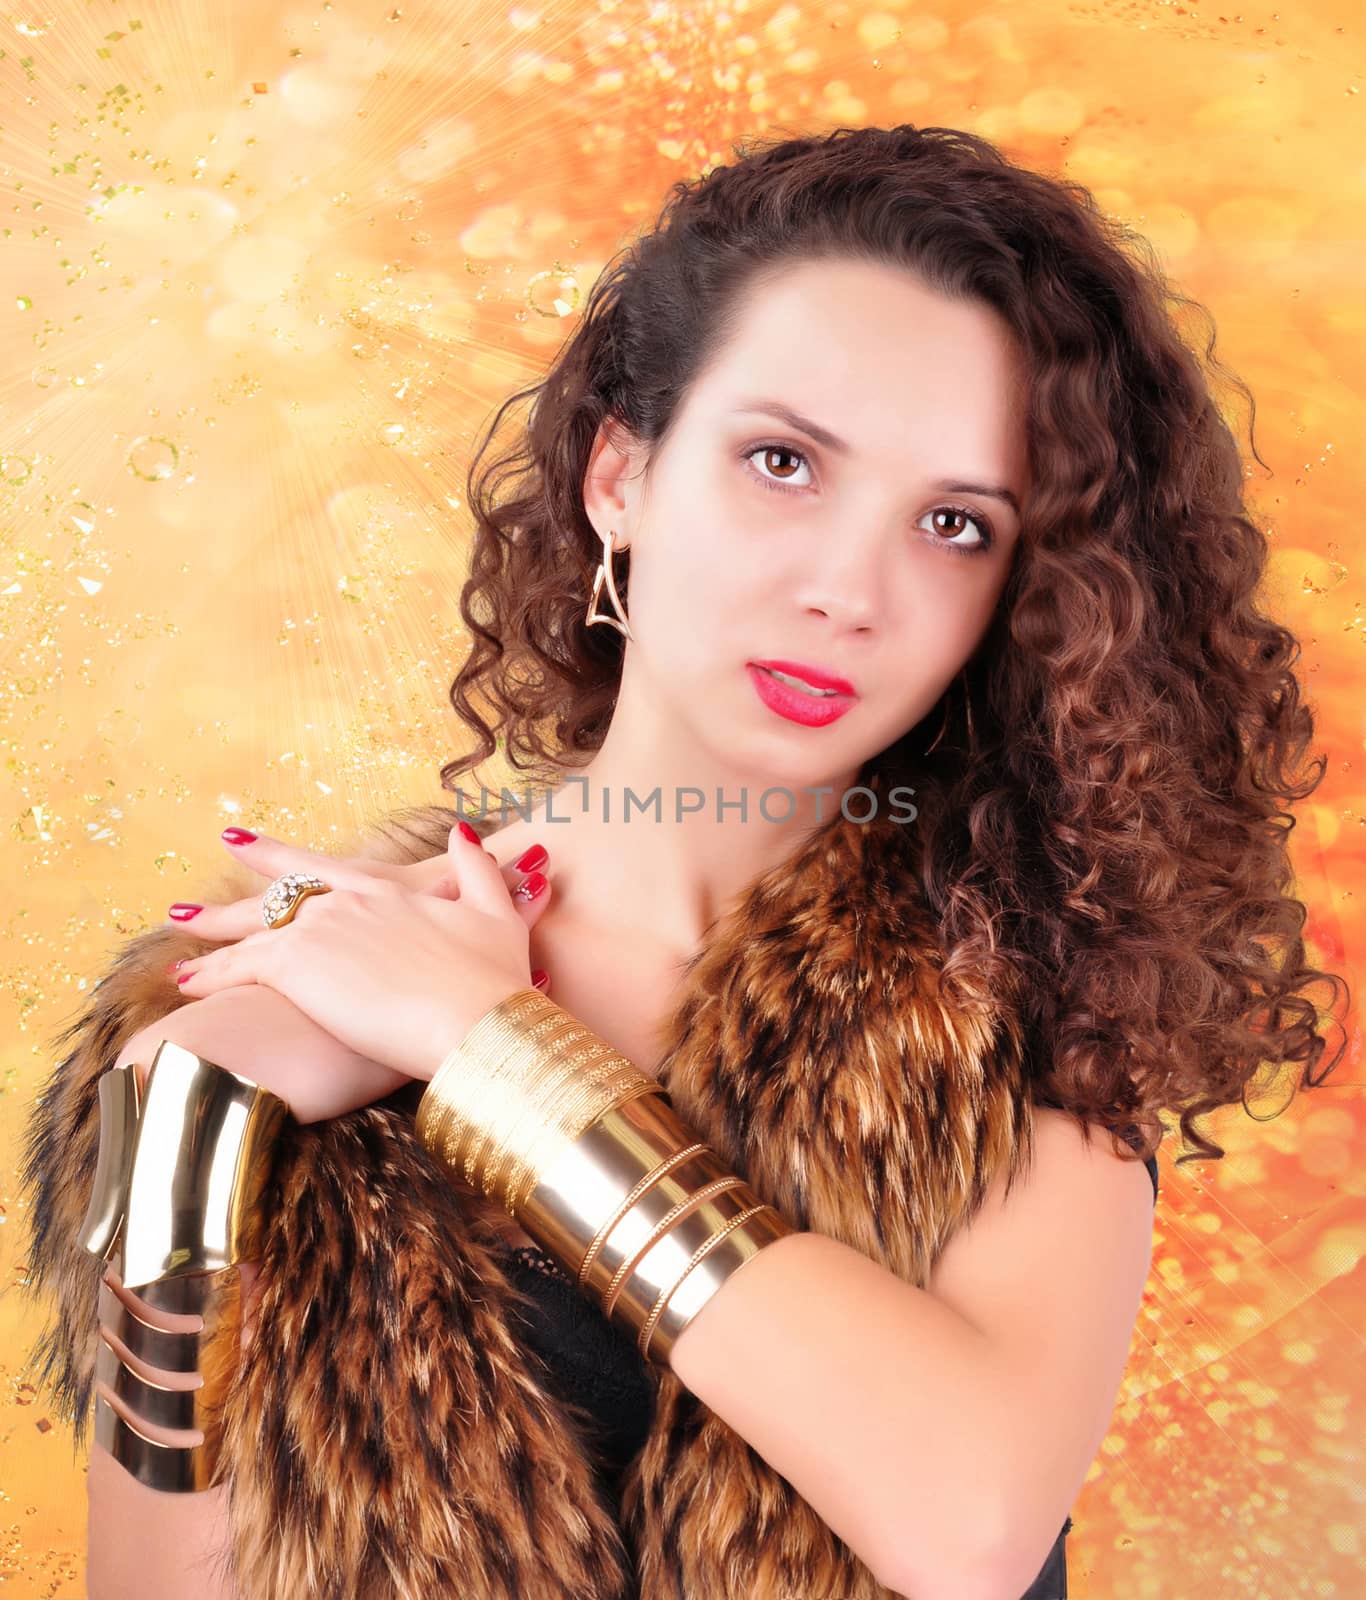 young girl with curly hair in a fur coat on an abstract background